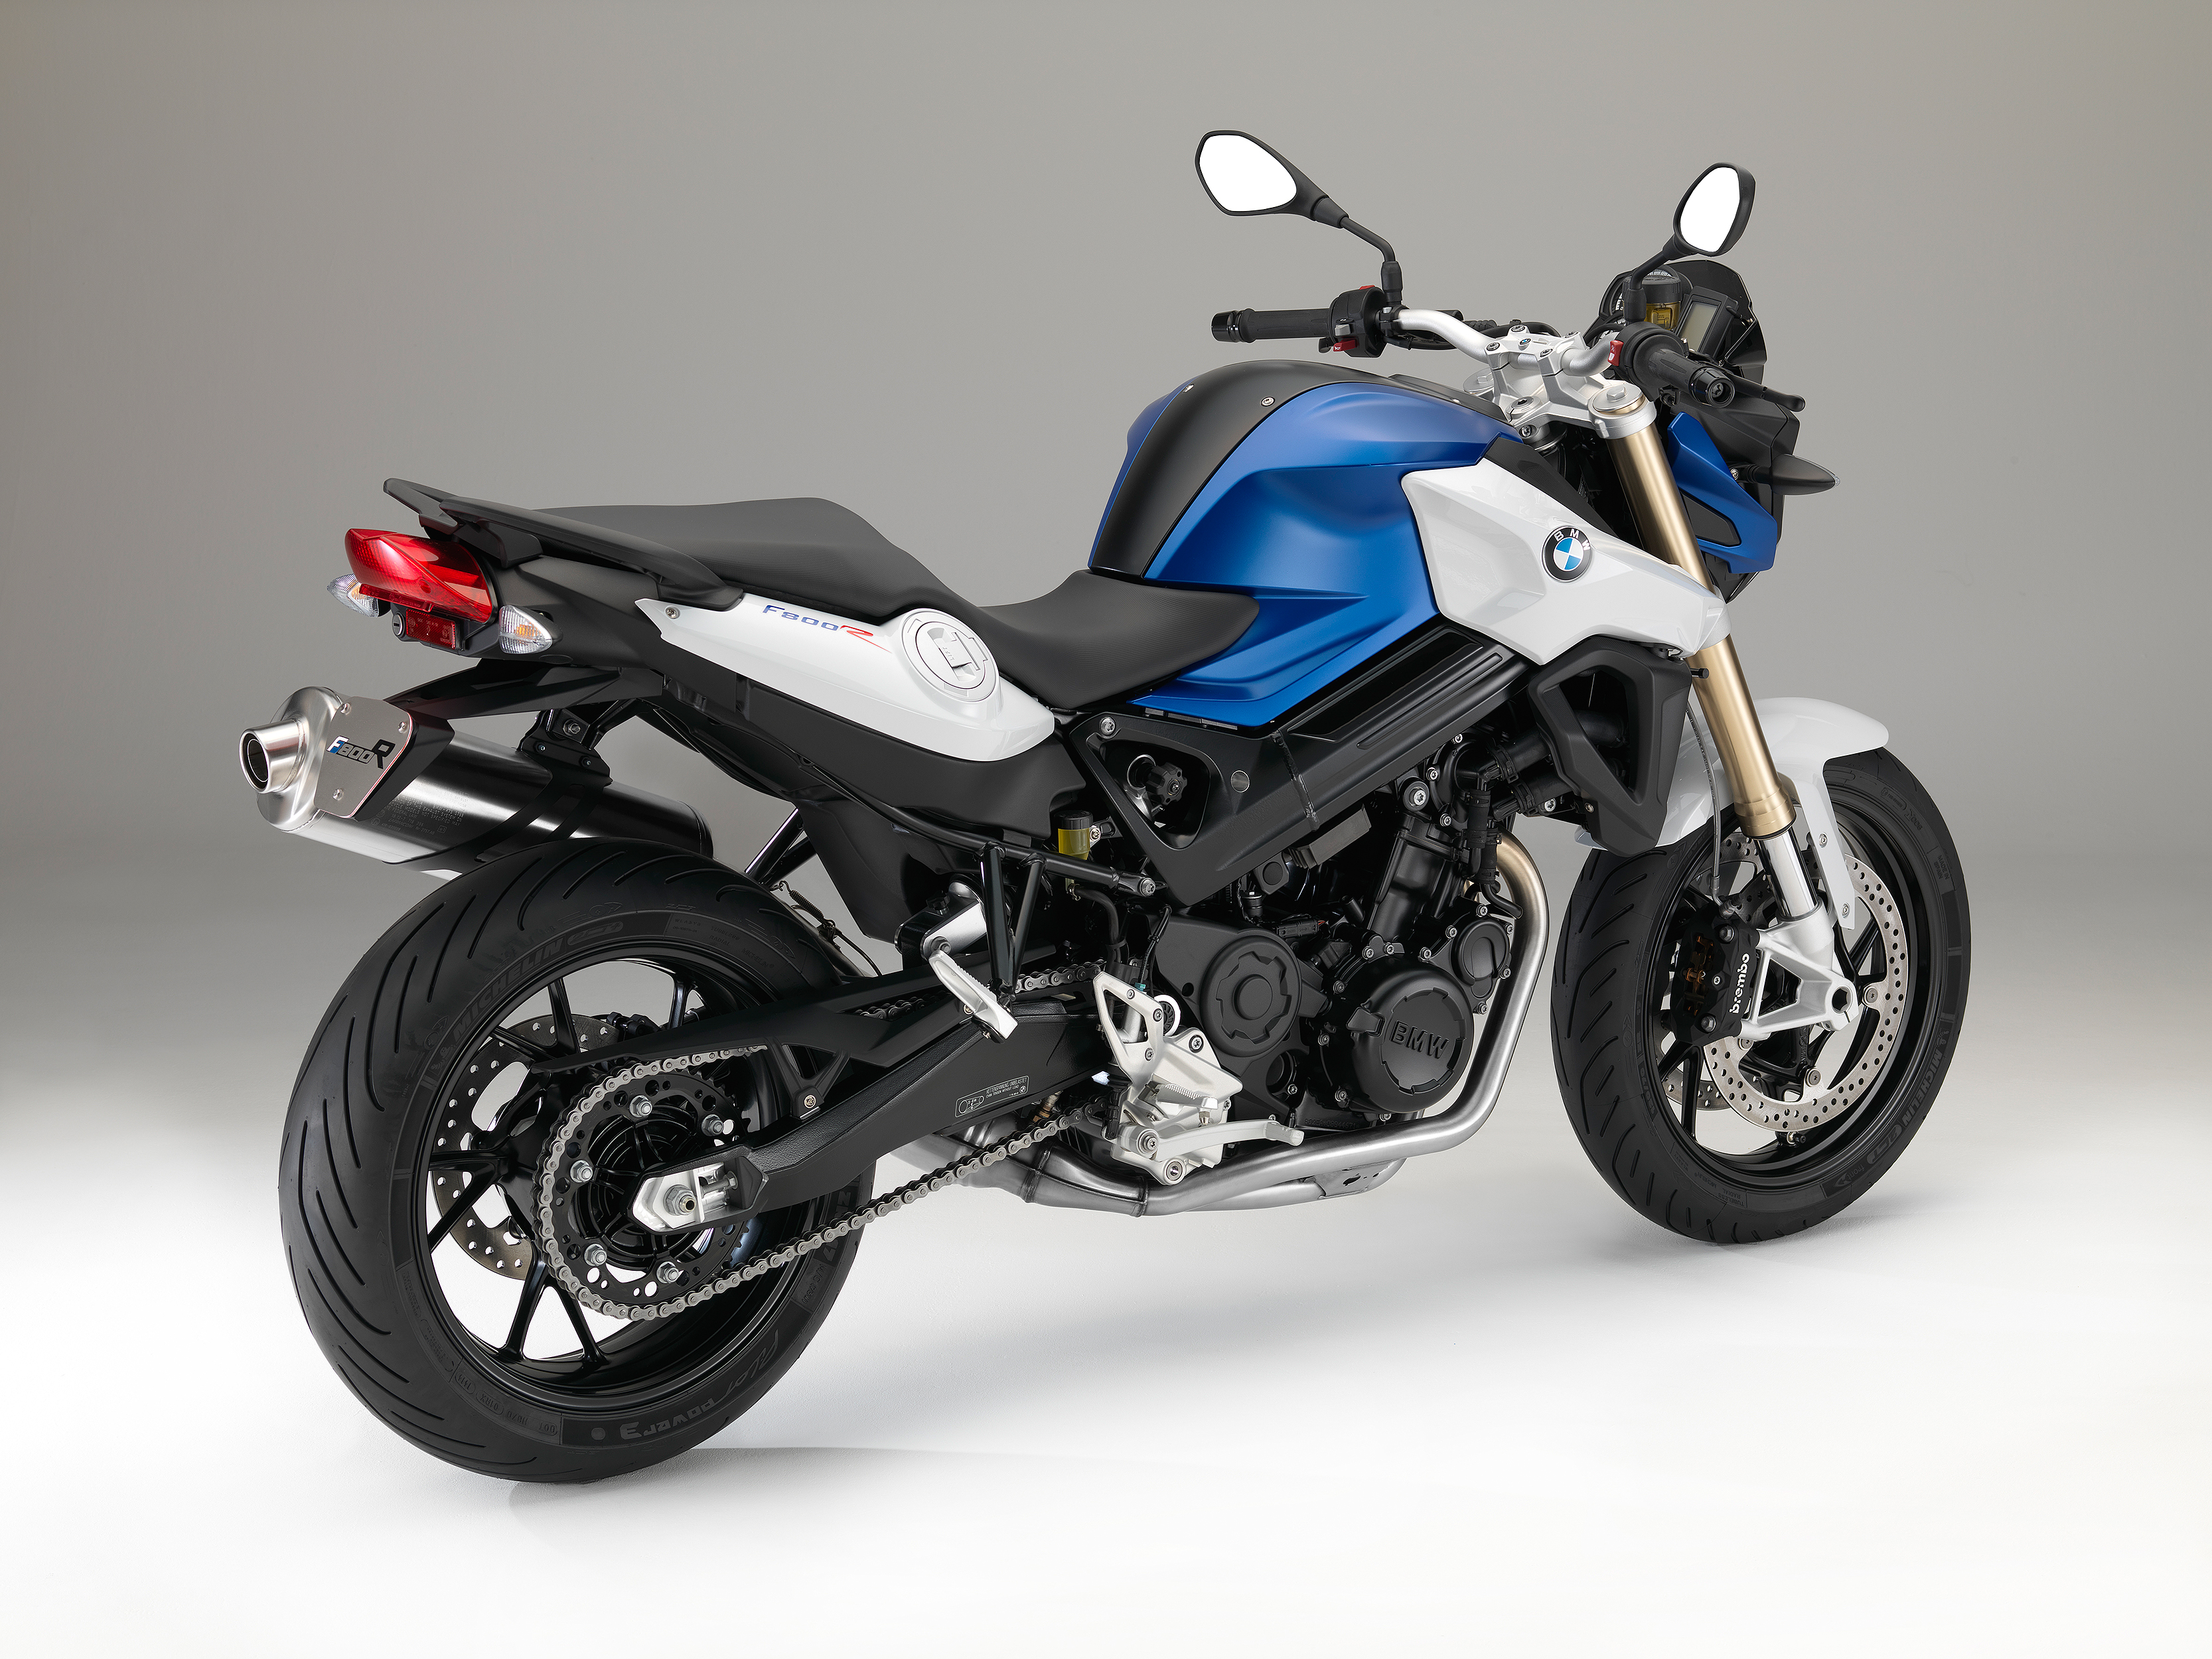 BMW F 800 R gets updated for year 2015; includes power